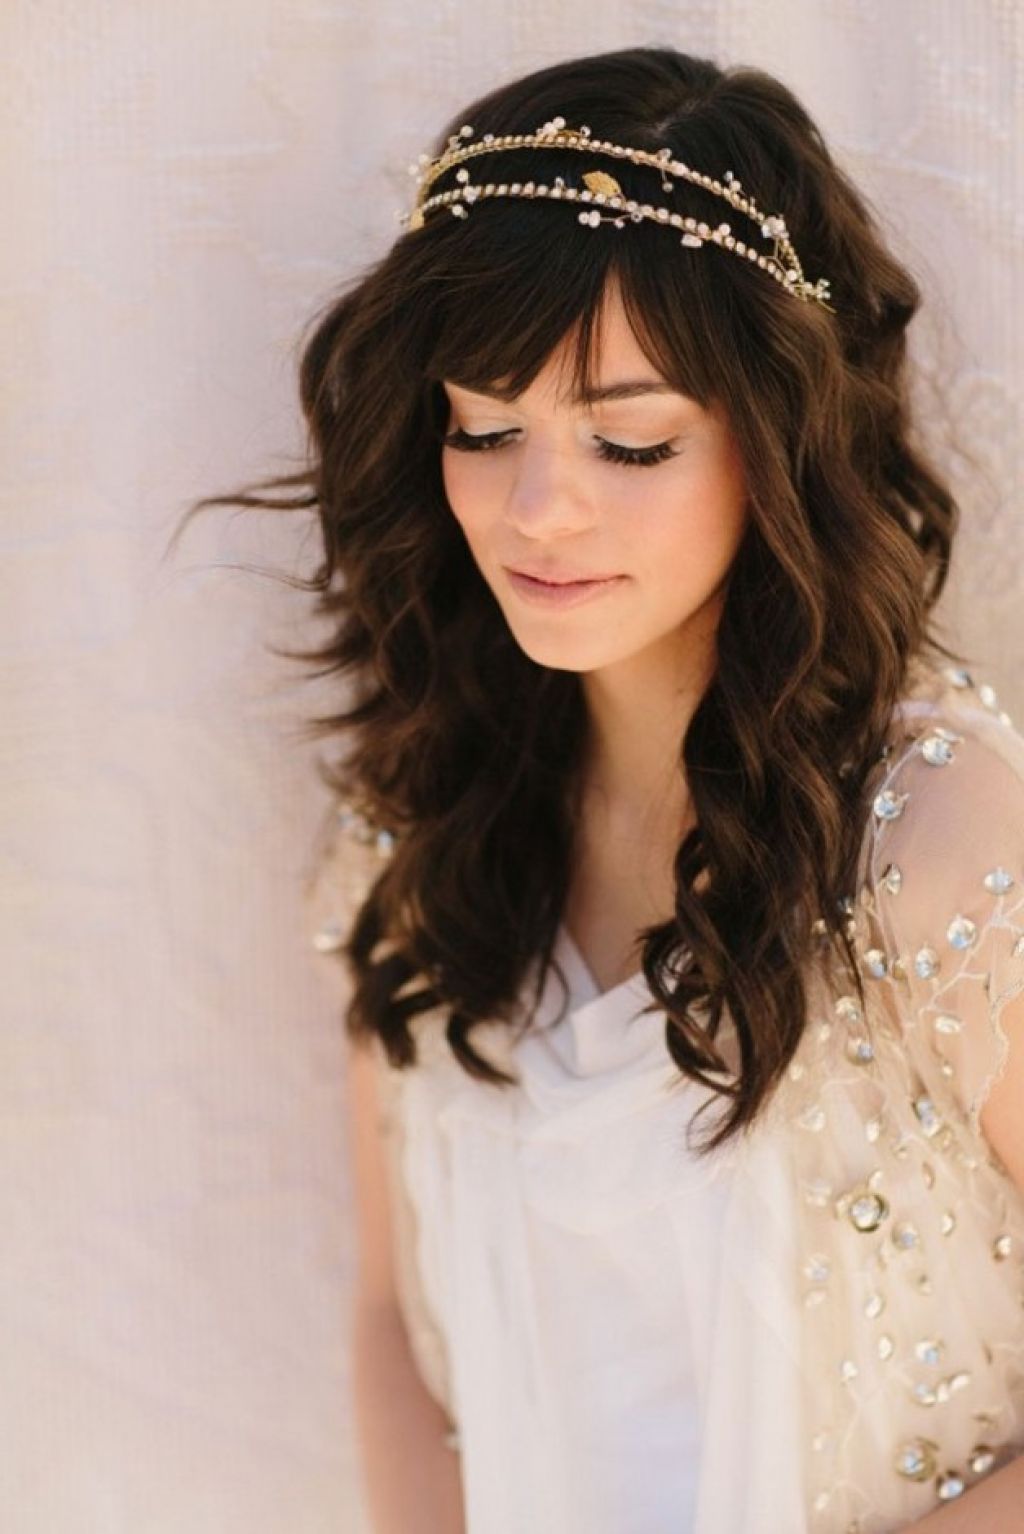 60+ Wedding & Bridal Hairstyle Ideas, Trends & Inspiration - The Xerxes1024 x 1534